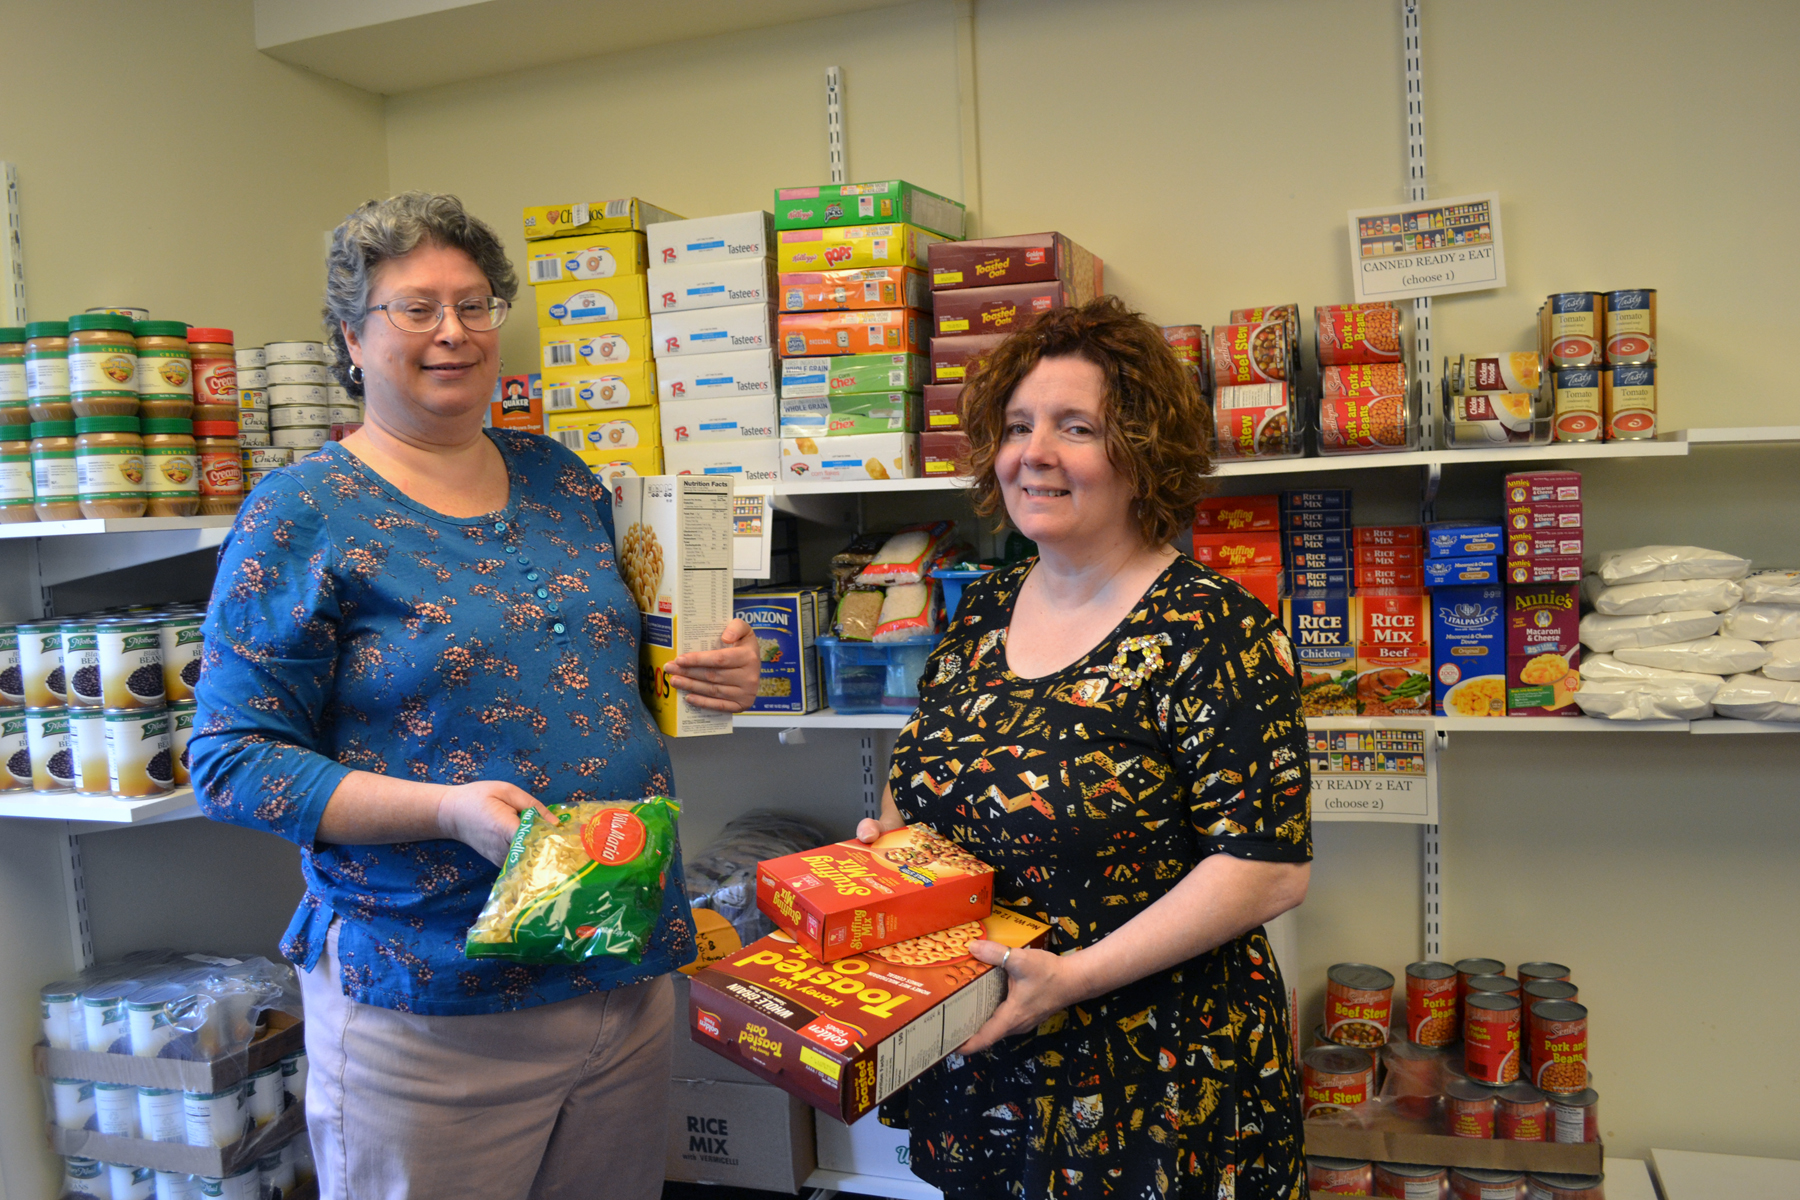 Uploaded Image: /vs-uploads/images/Q3 Picture - Tricia Shaw Food Pantry.JPG